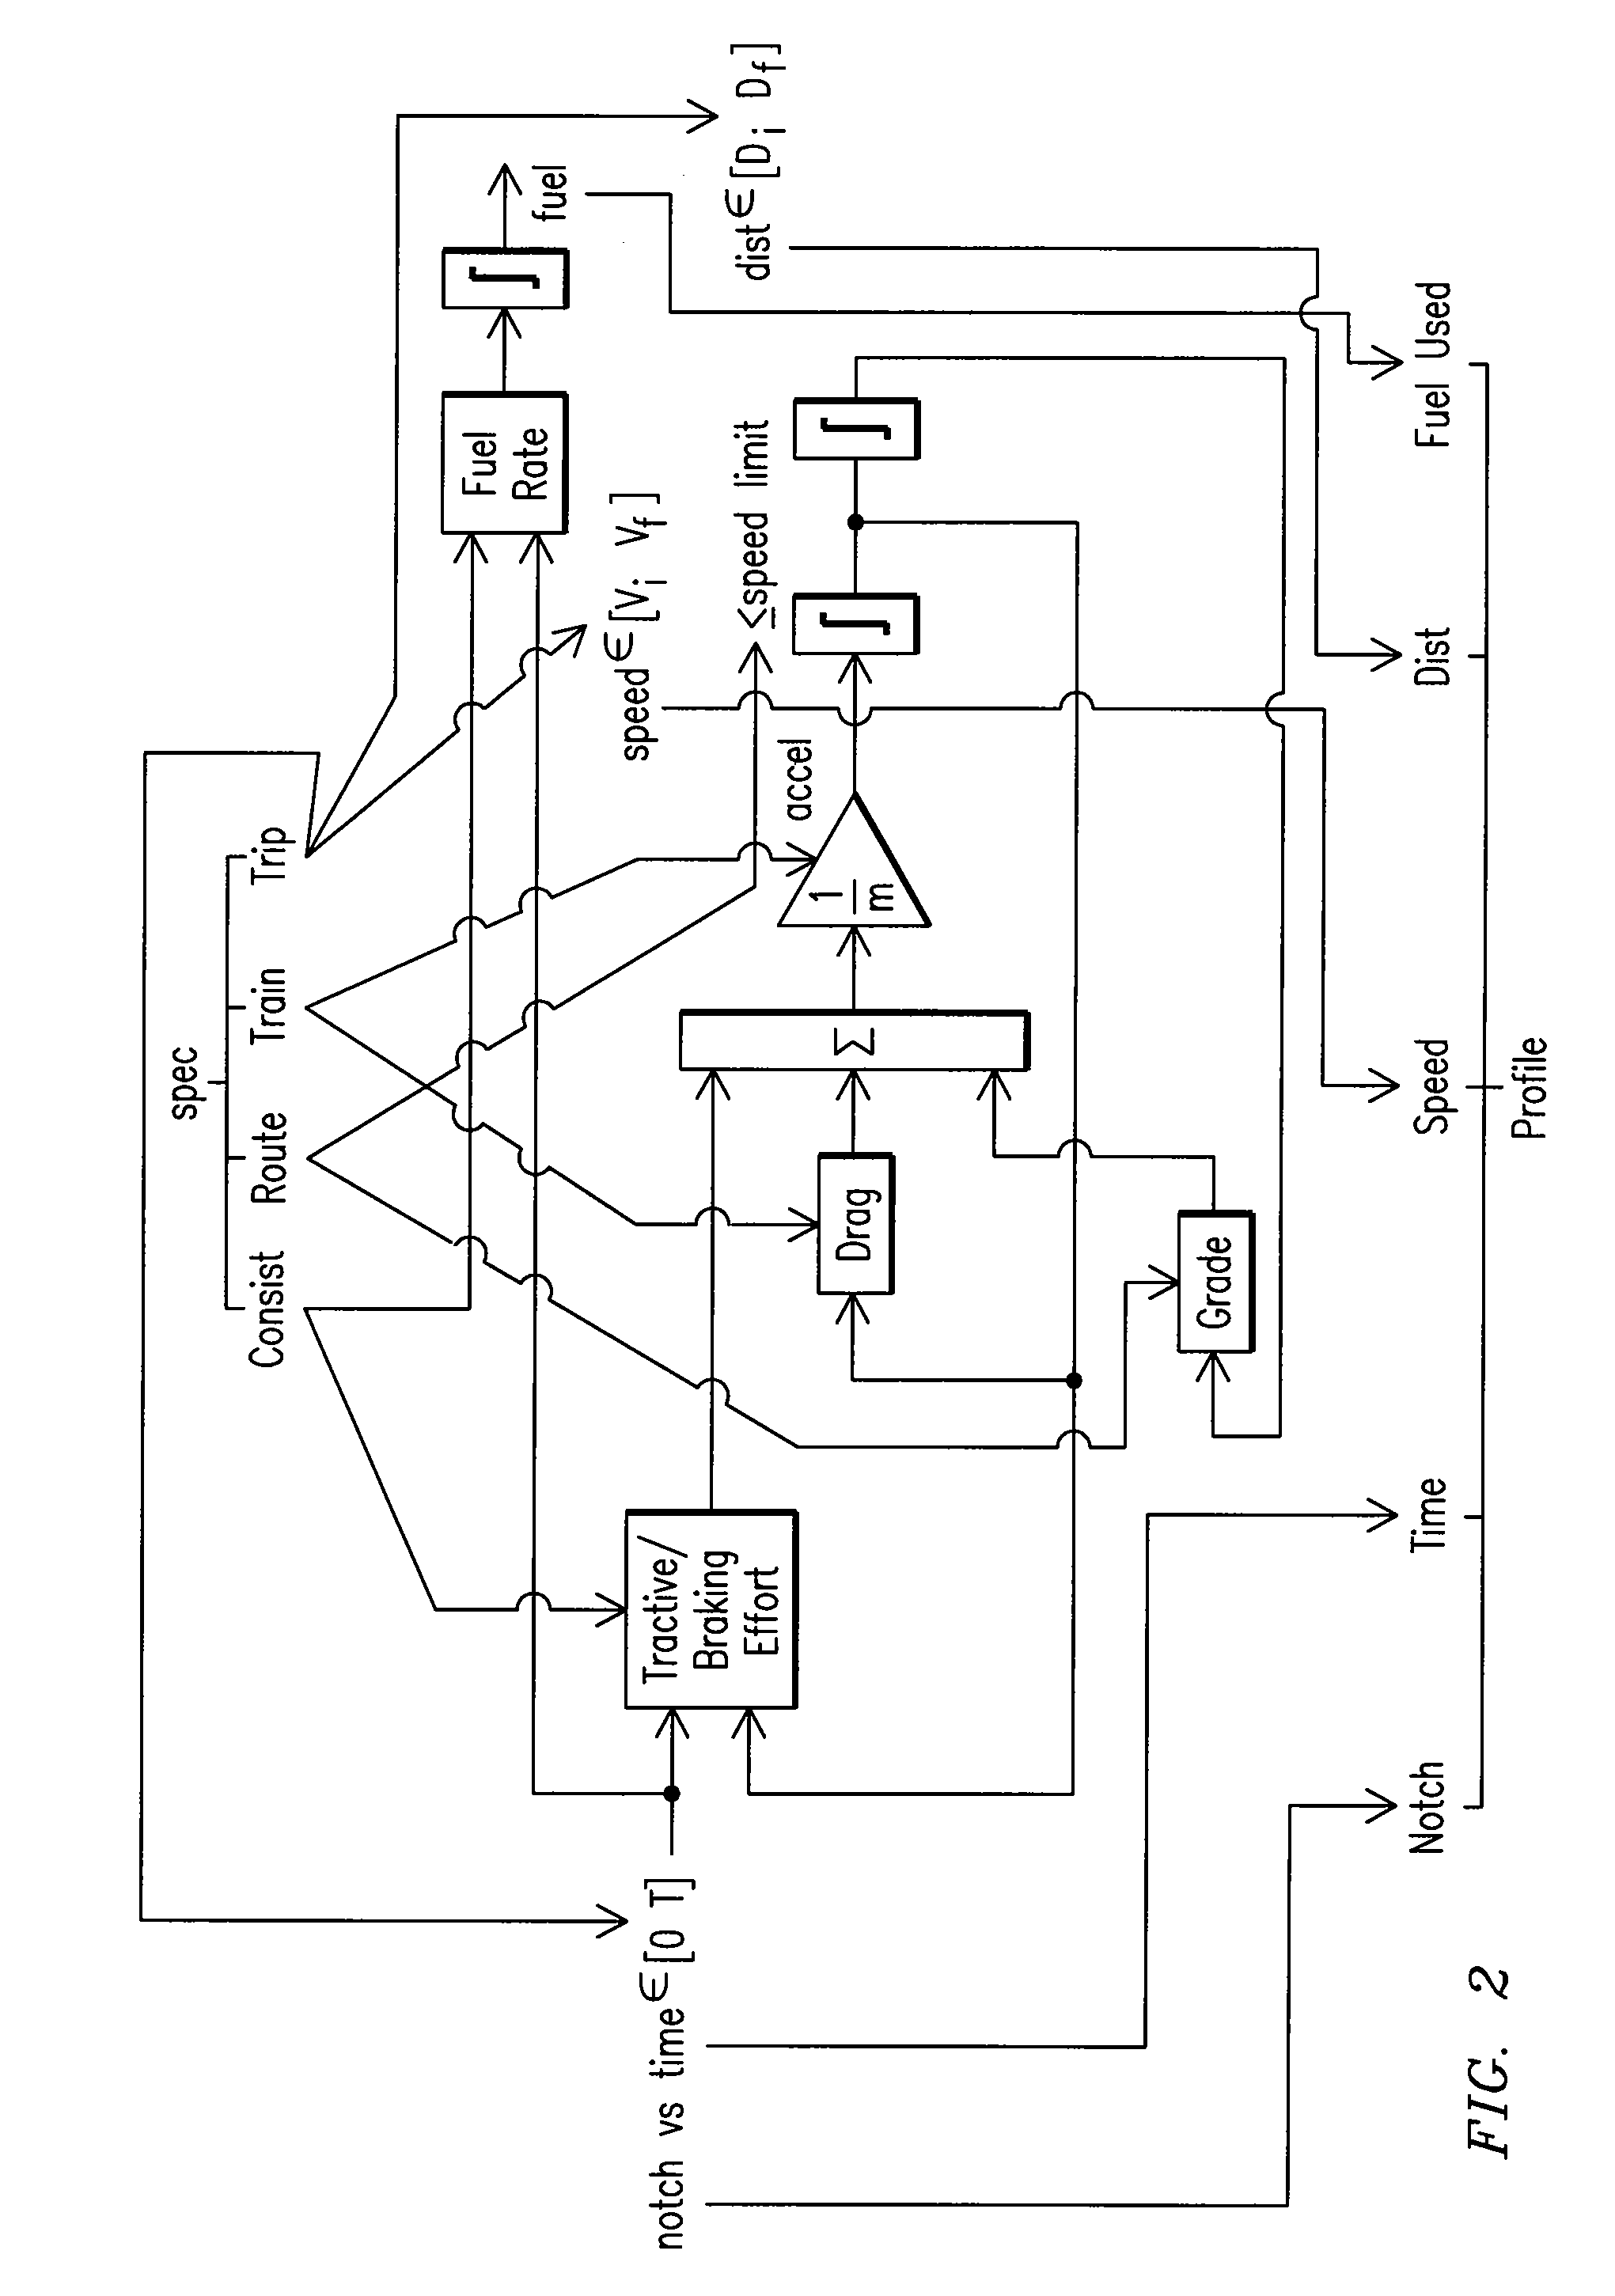 Method and Computer Software Code for Determining When to Permit a Speed Control System to Control a Powered System